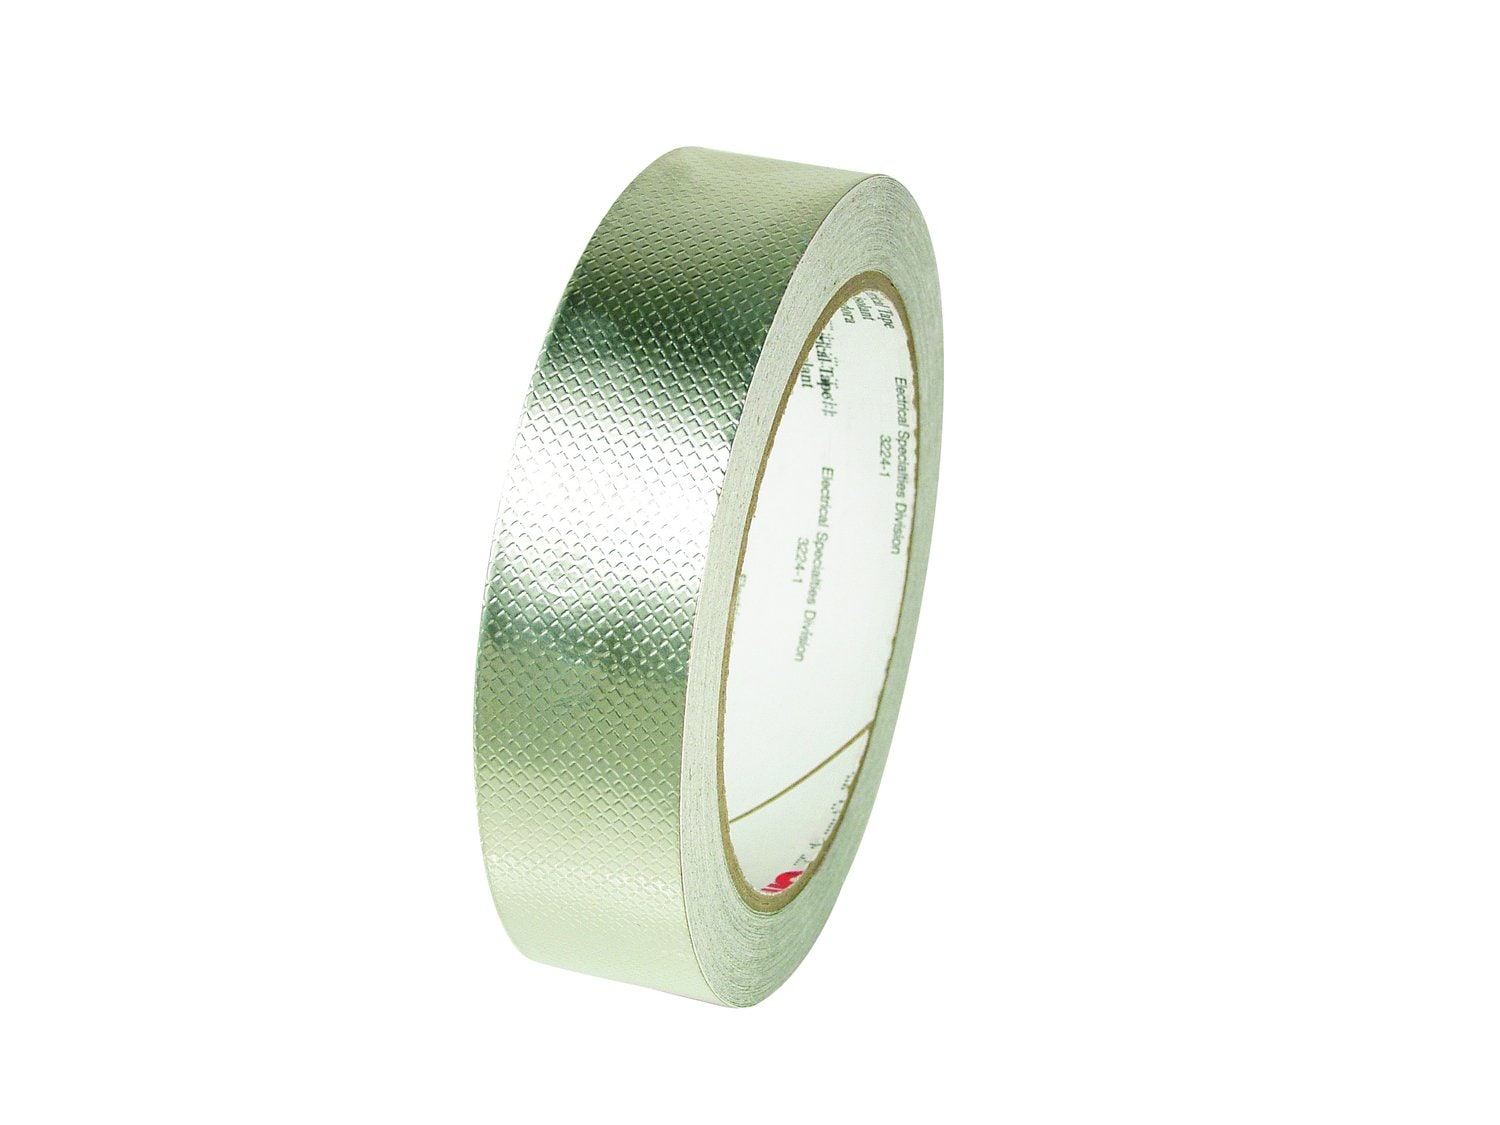 7100050828 - 3M Embossed Tin-Plated Copper Foil EMI Shielding Tape 1345, 7.7 in x 10
in, Sheet, 10 Sheets/Bag